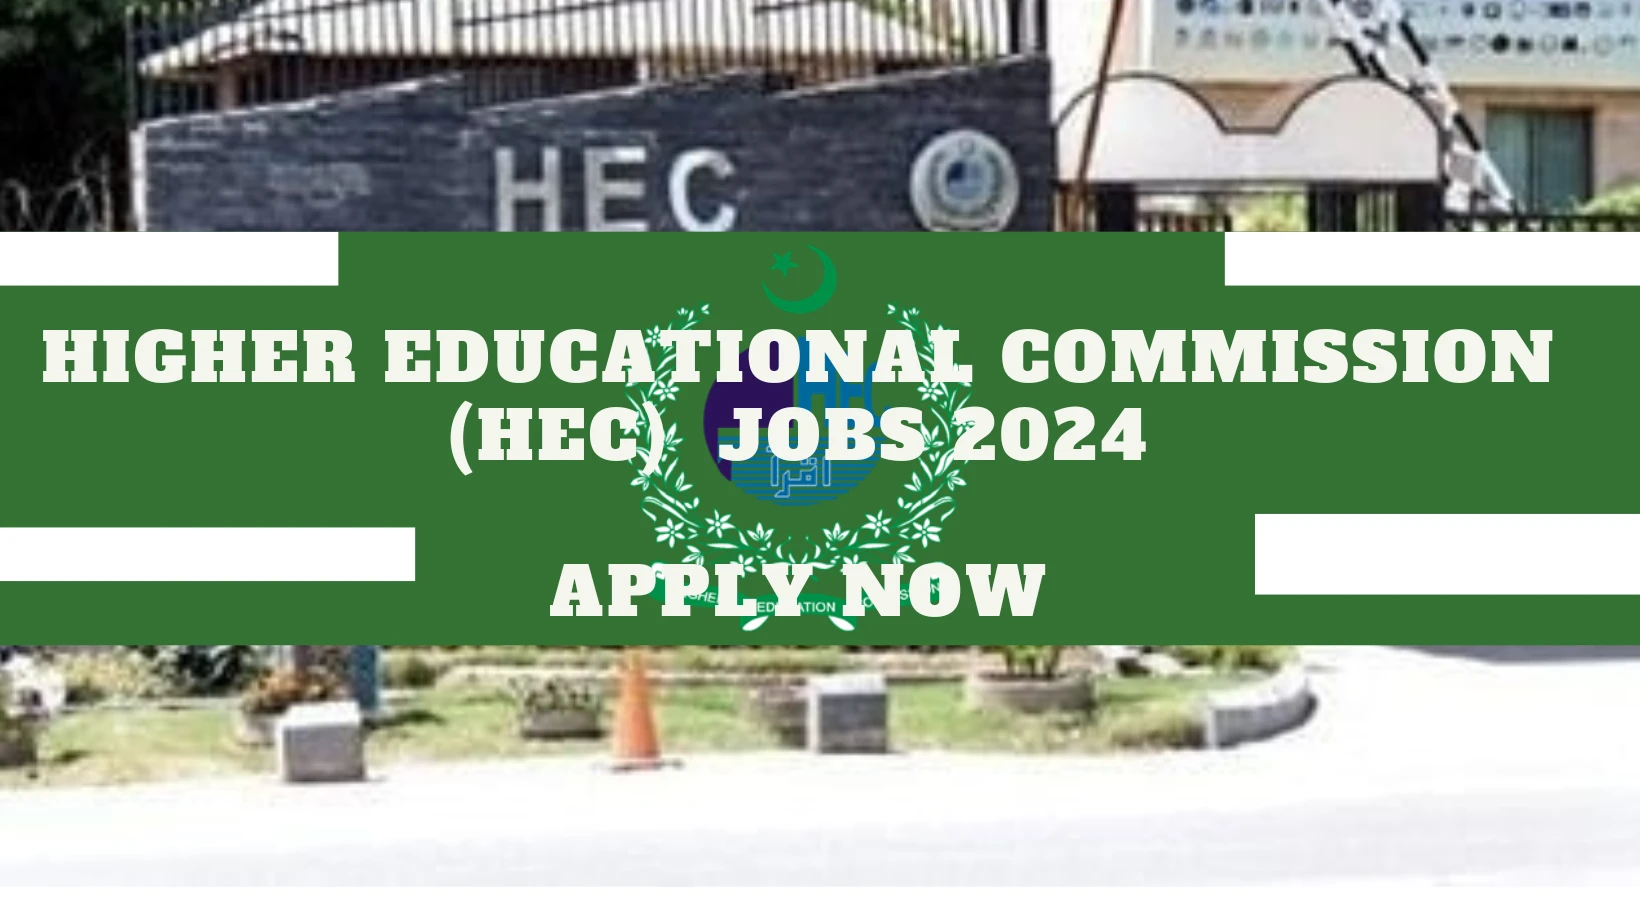 HIGHER EDUCATIONAL COMMISSION (HEC)